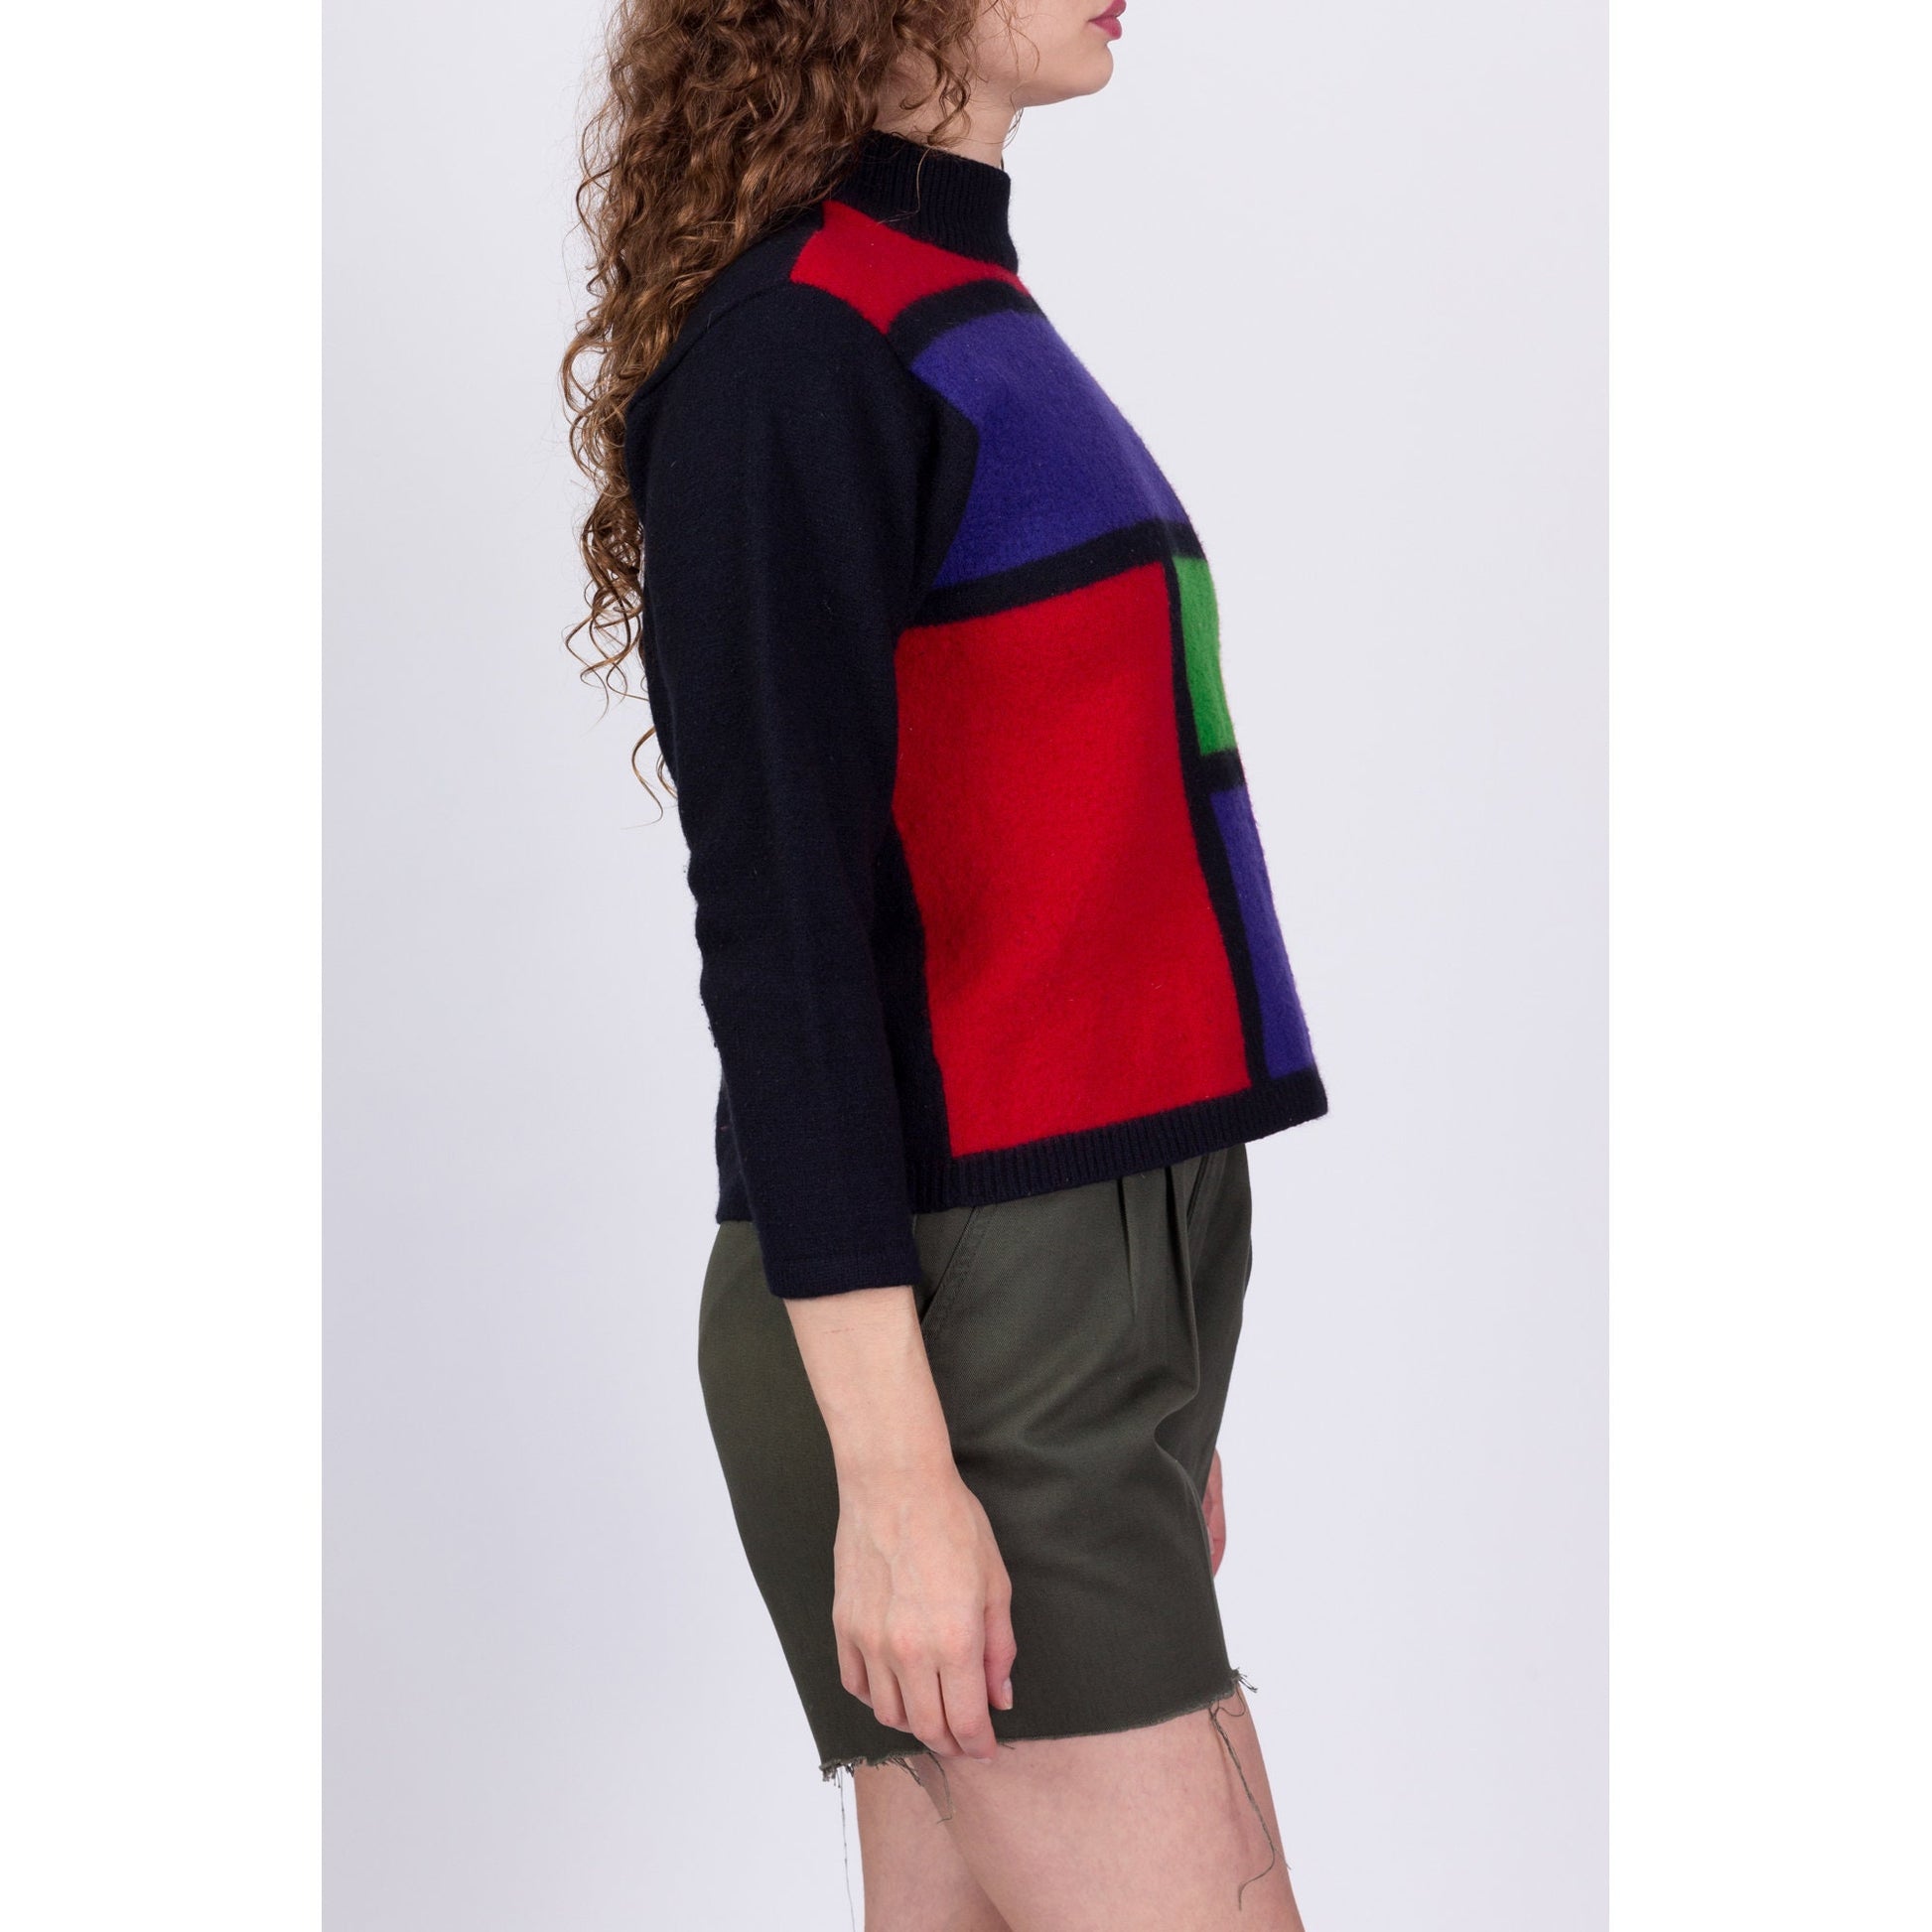 80s Mondrian Lambswool Knit Cropped Sweater - Petite Small 